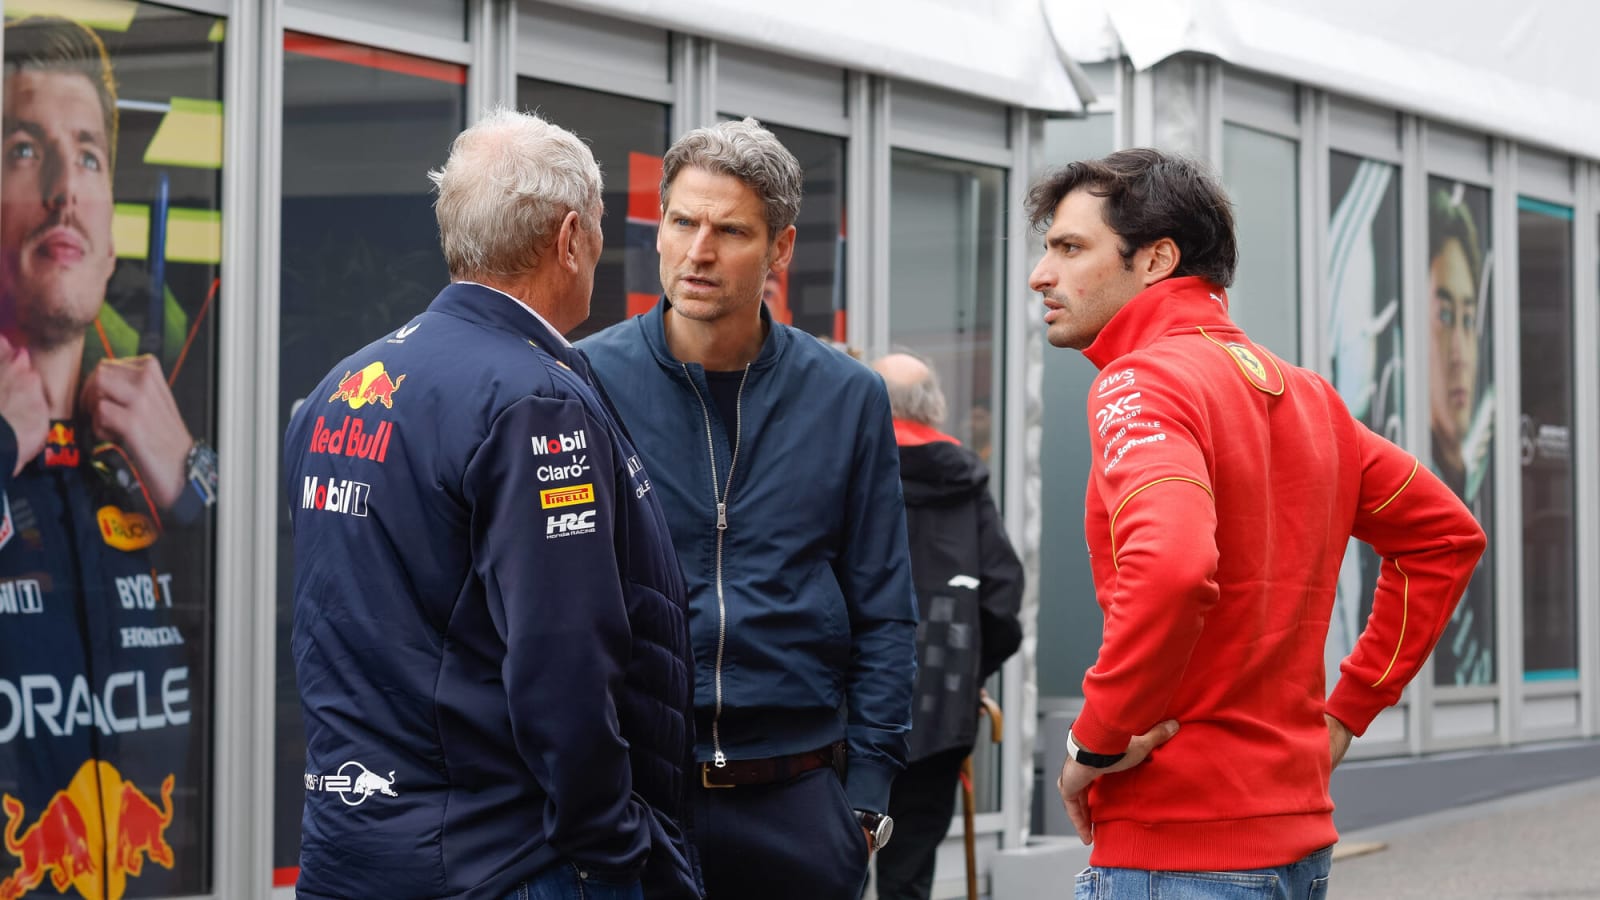 Helmut Marko reveals the ‘ultimate test’ that Red Bull put Max Verstappen through during the 2014 Suzuka event